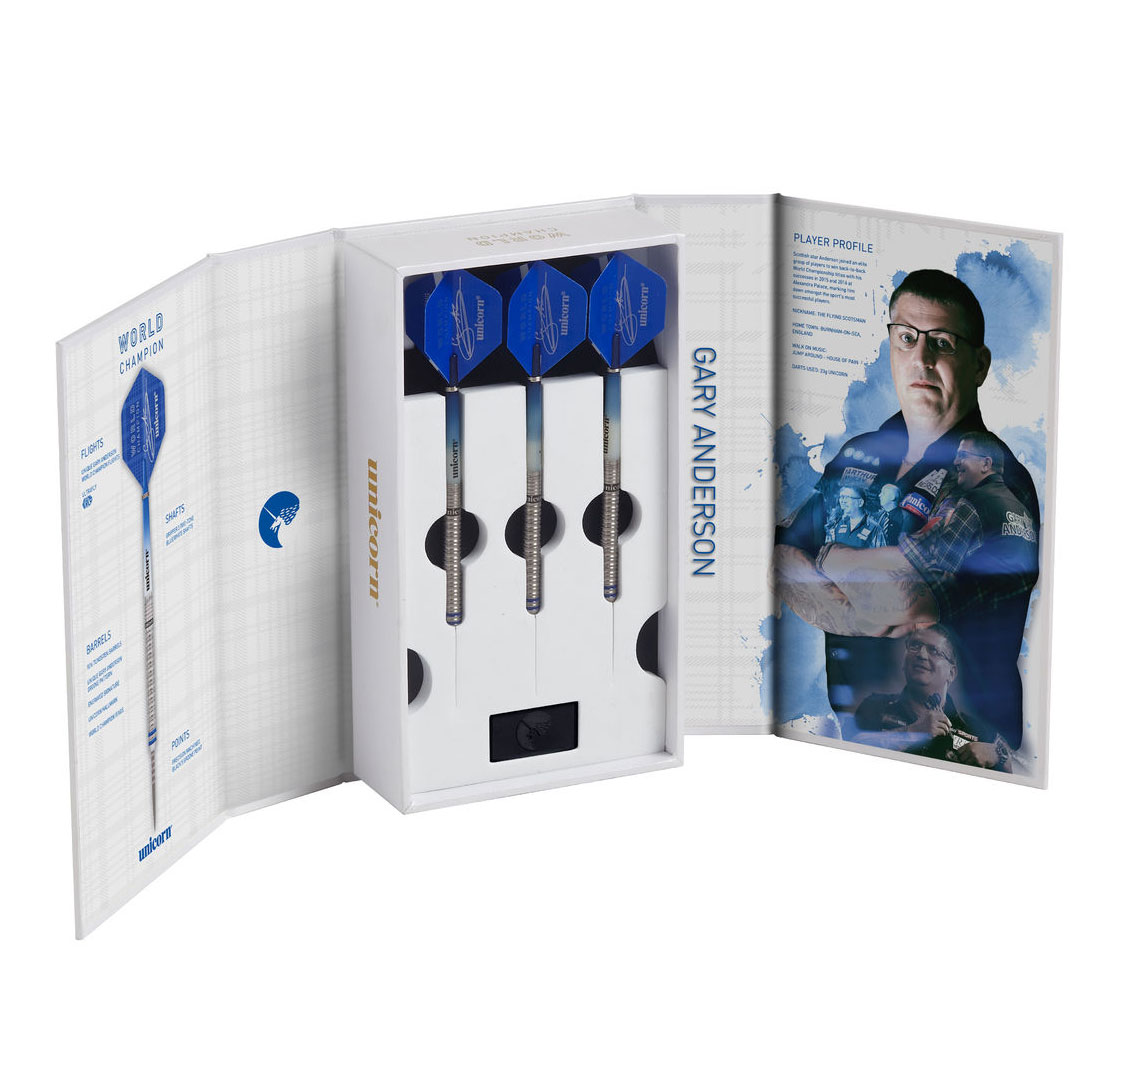 GARY ANDERSON WORLD CHAMPION PHASE 3 DELUXE DARTS SET